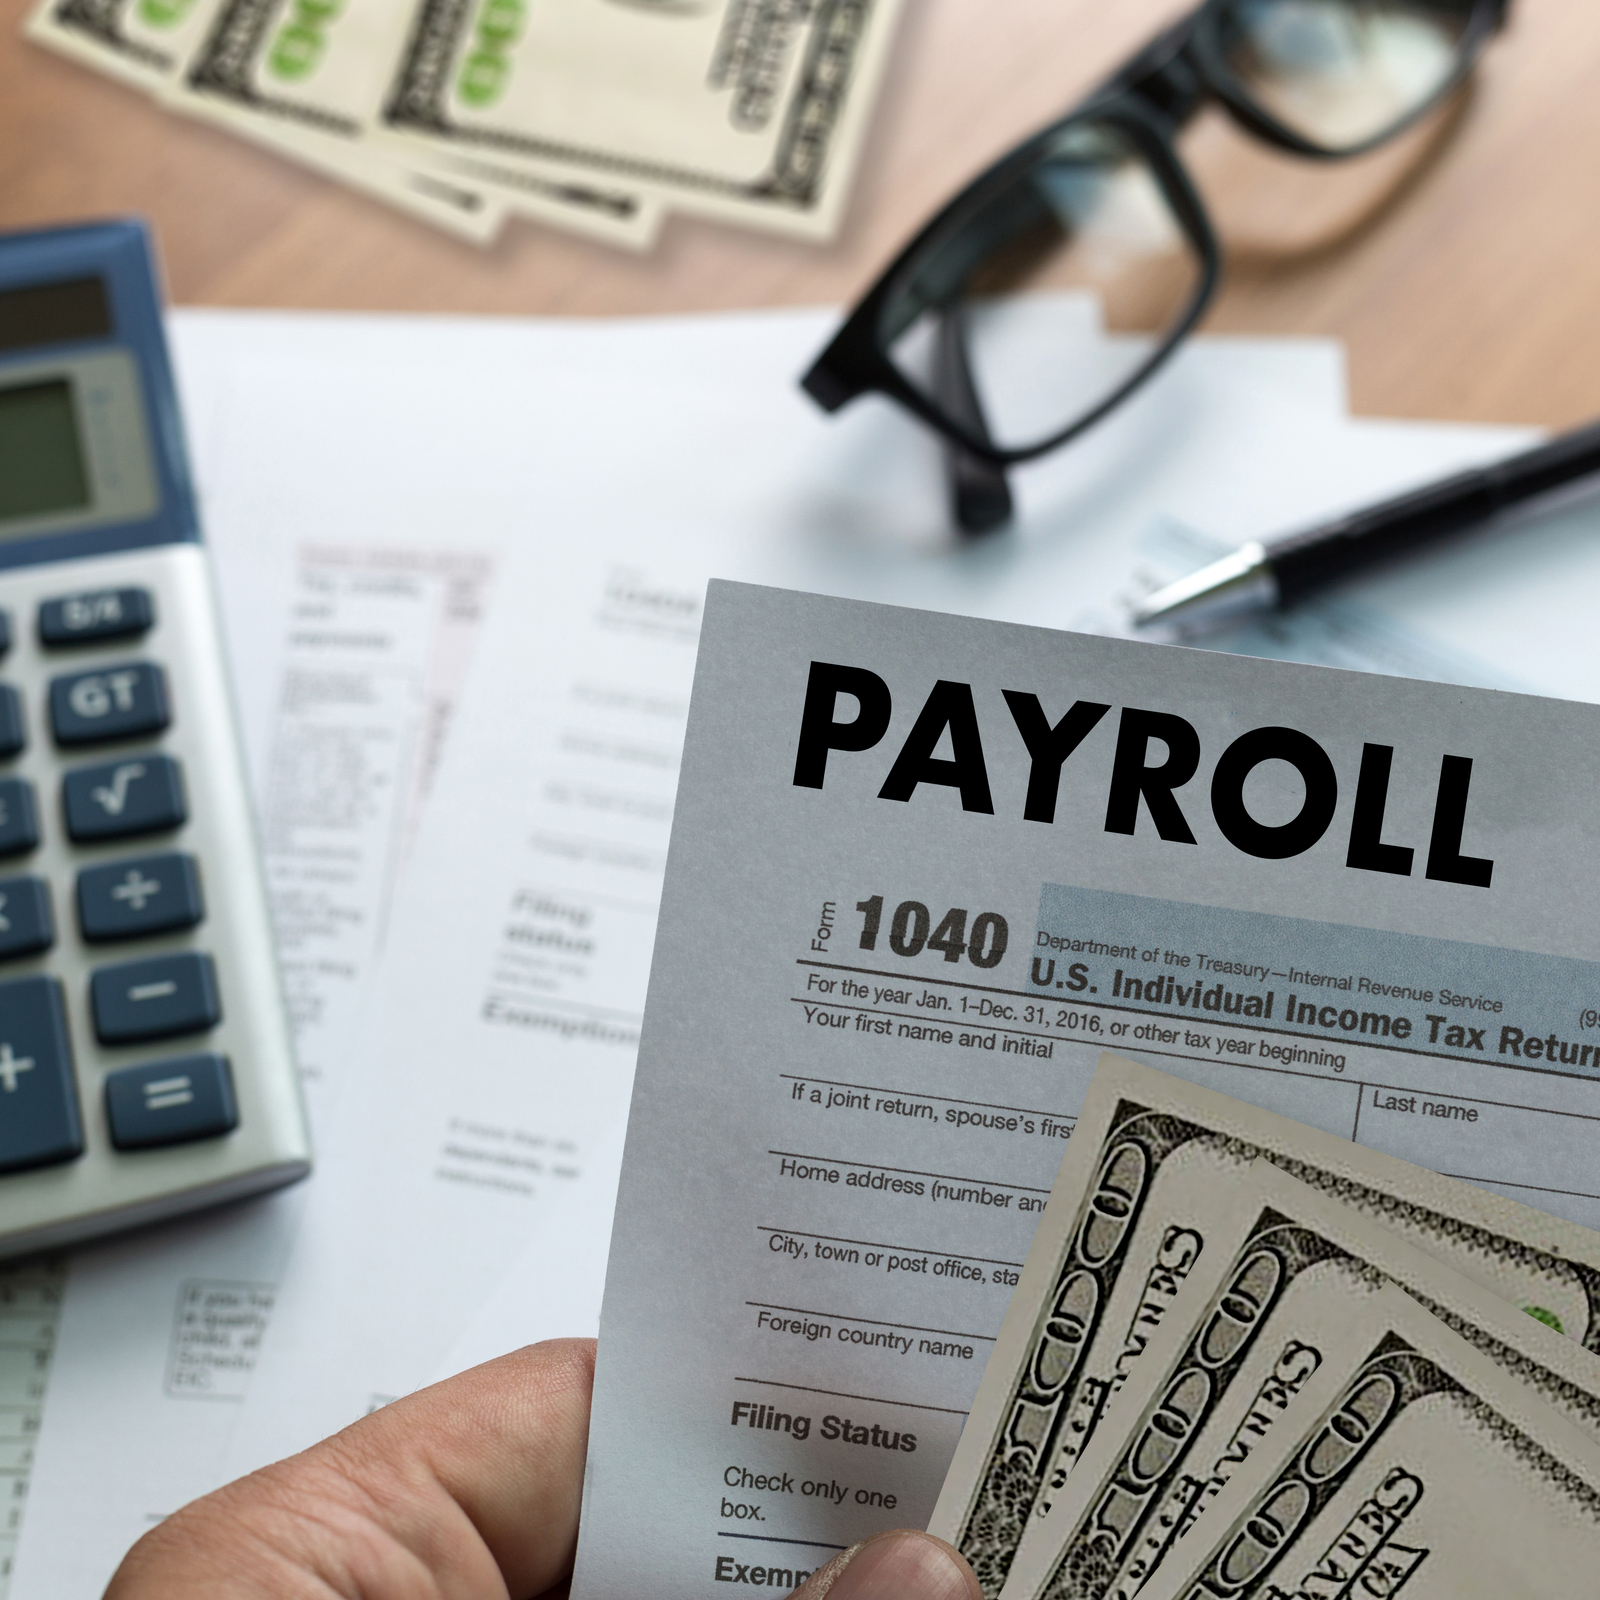 American Companies Can Now Pay Payroll Taxes In Cryptocurrency via Bitwage